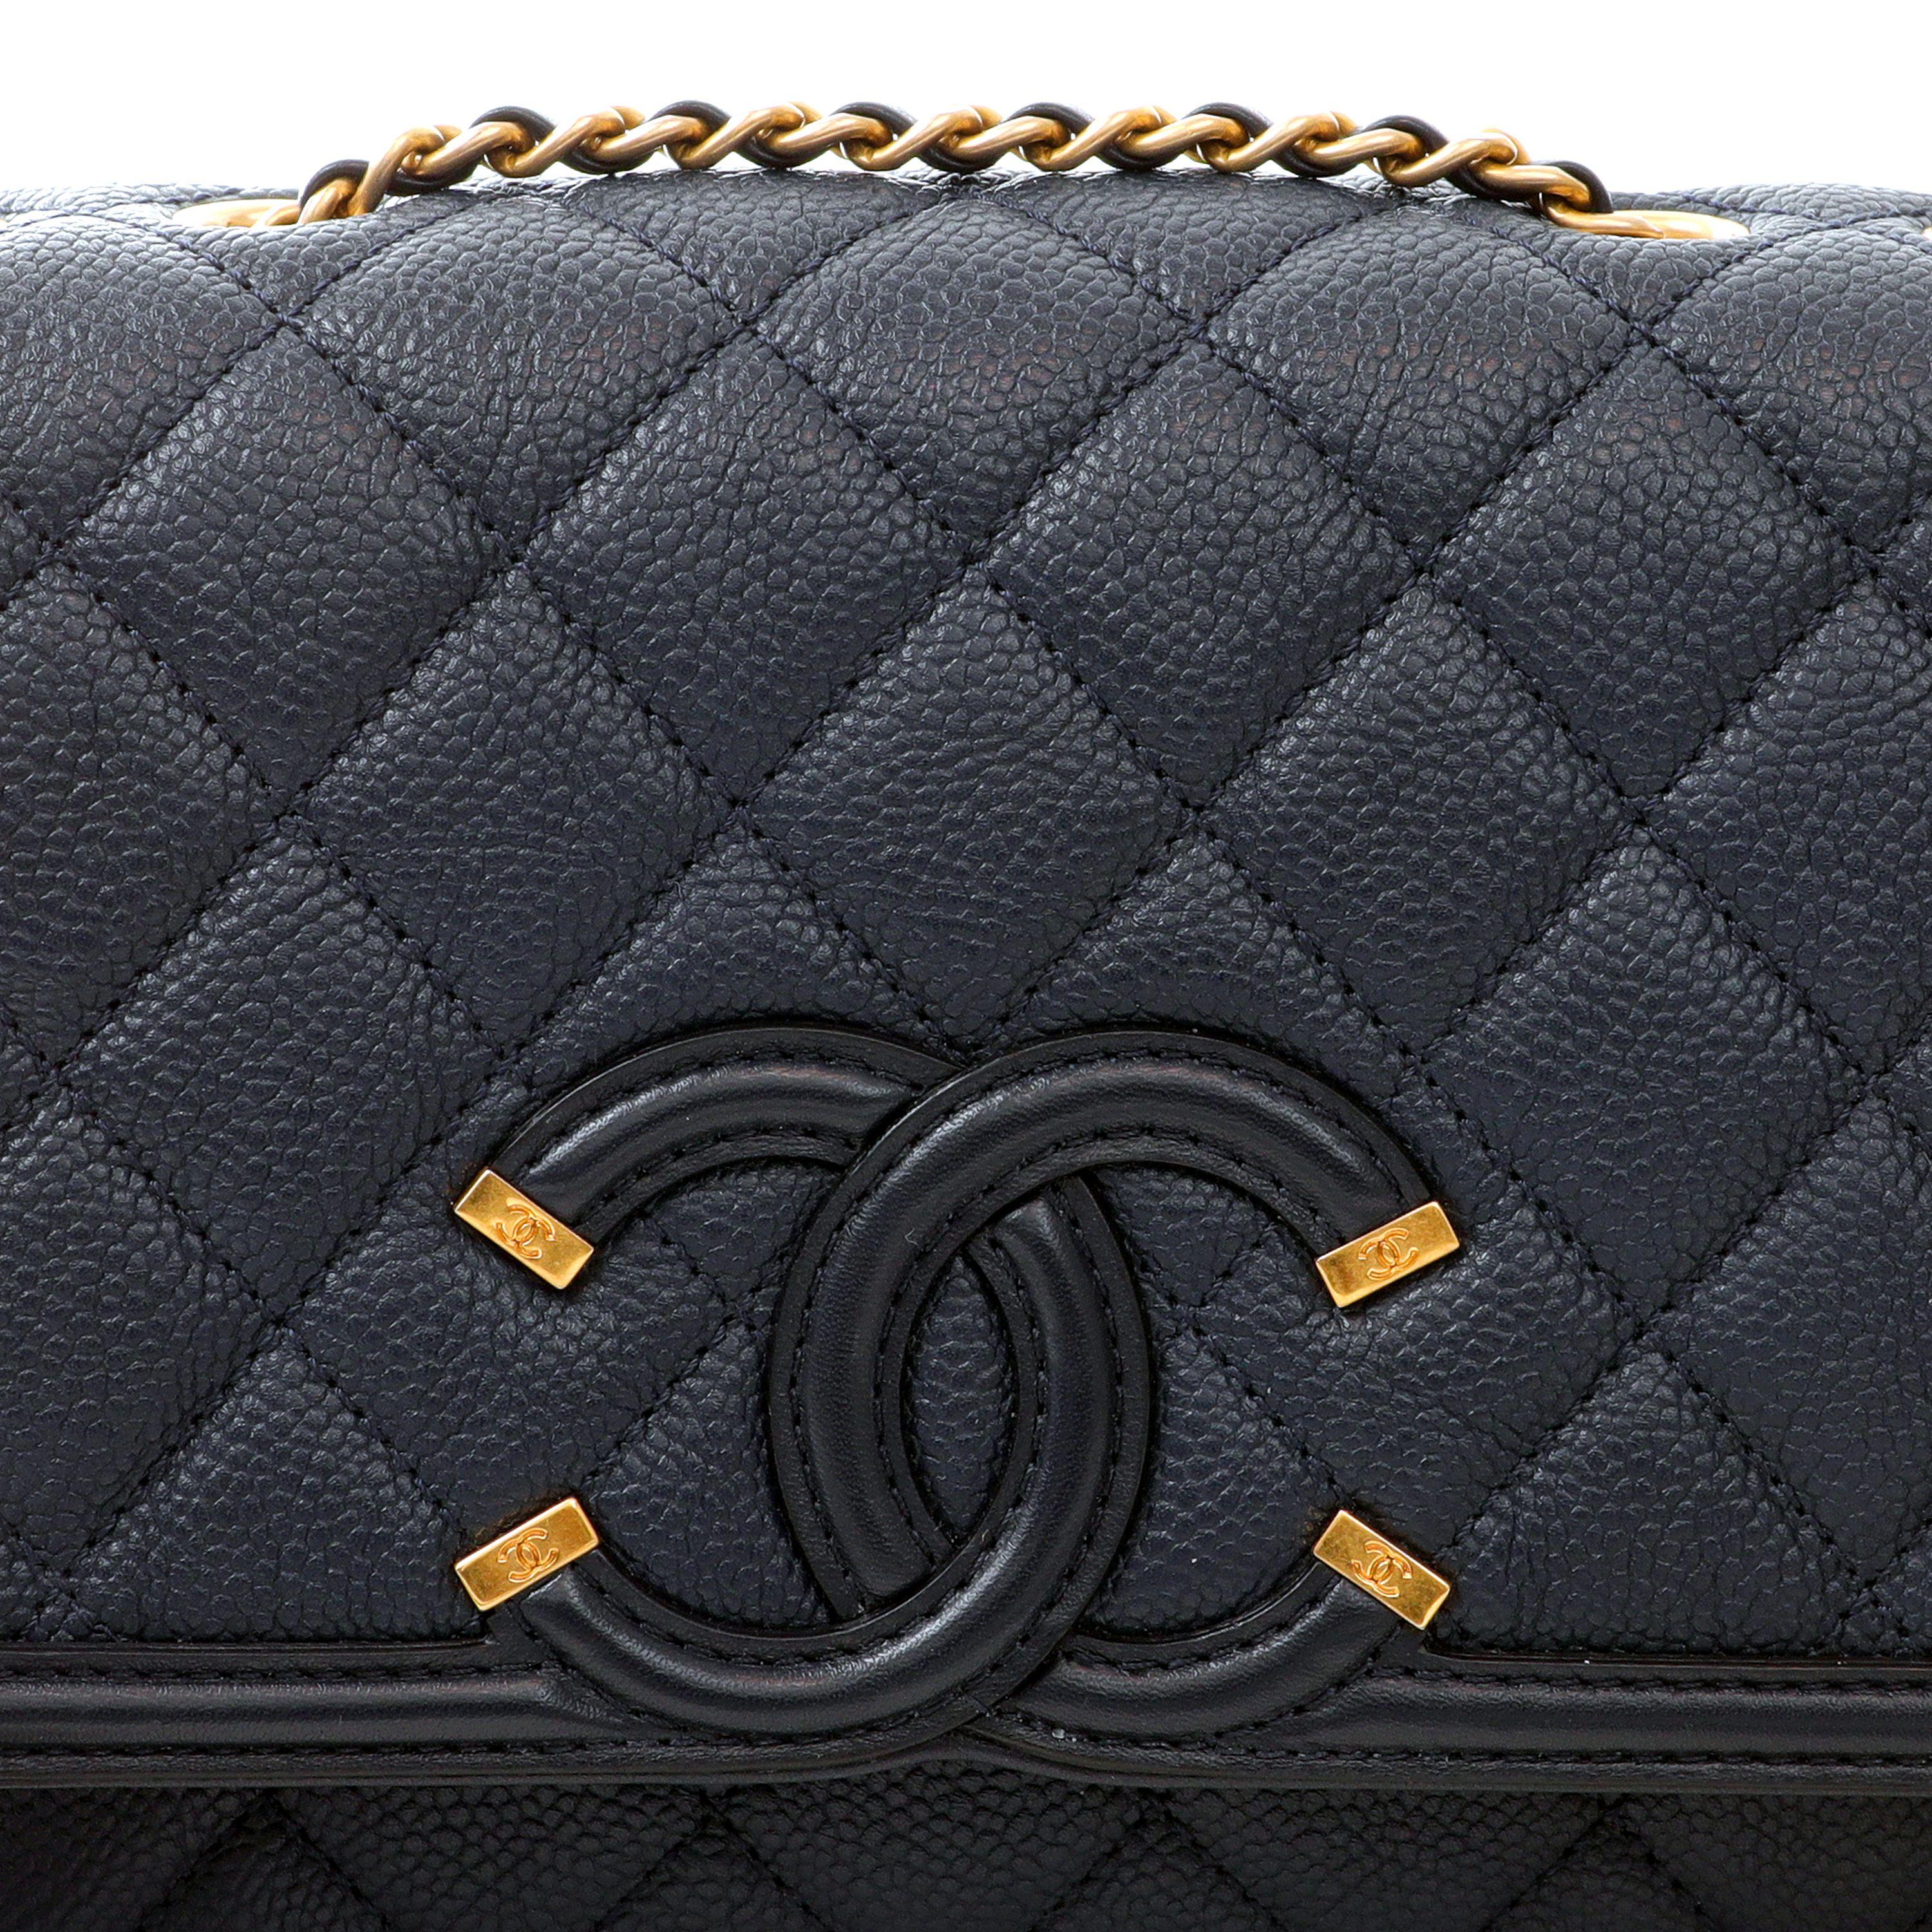 This authentic Chanel Navy Caviar Filigree Crossbody Flap Bag is pristine. Classic navy-blue caviar leather flap bag is textured and durable.  Quilted in signature Chanel diamond pattern with warm gold hardware.  Elegant leather and chain entwined